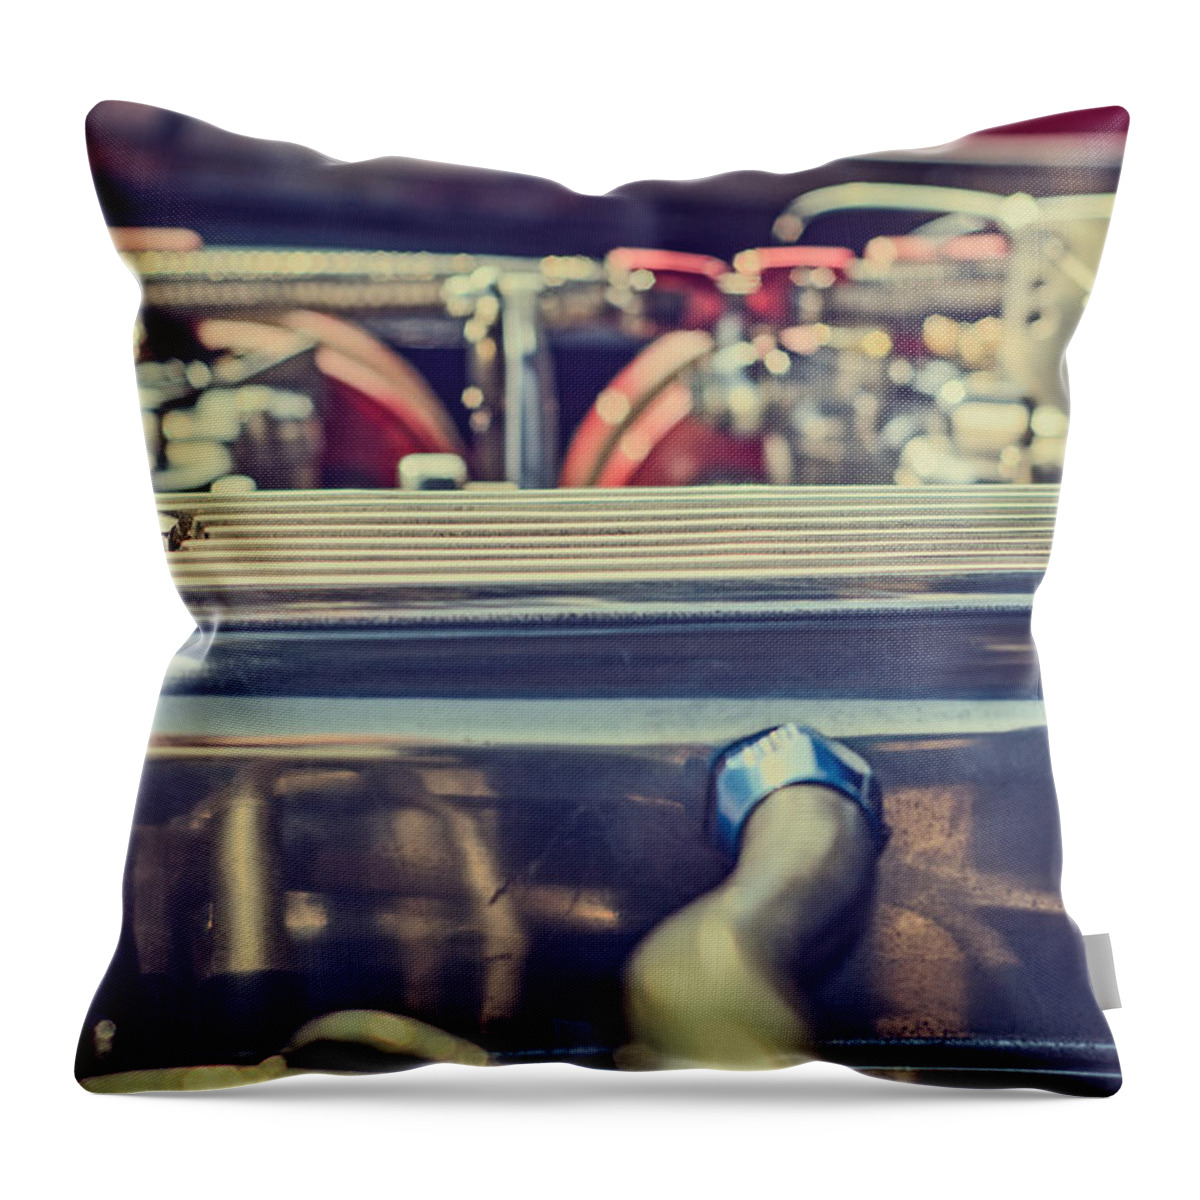 Style Throw Pillow featuring the photograph Triumph TR4 Engine by Spikey Mouse Photography